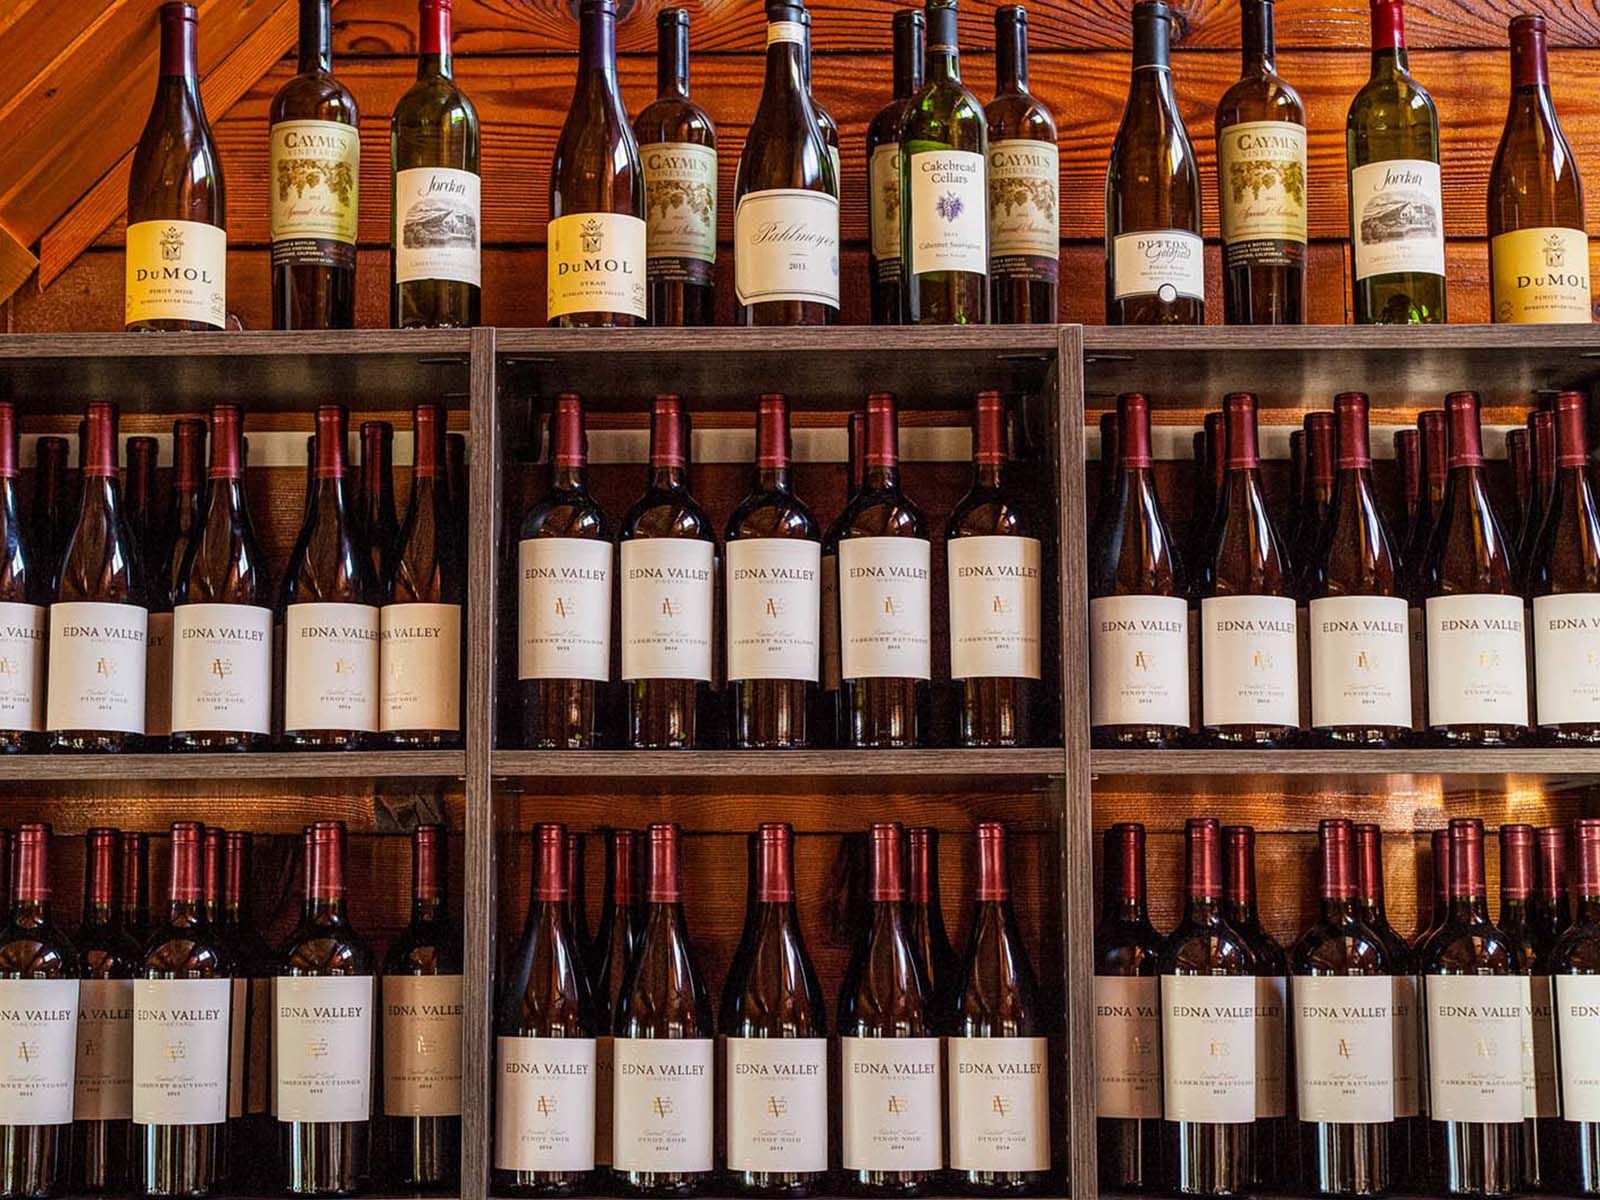 A diverse white and red wine selection